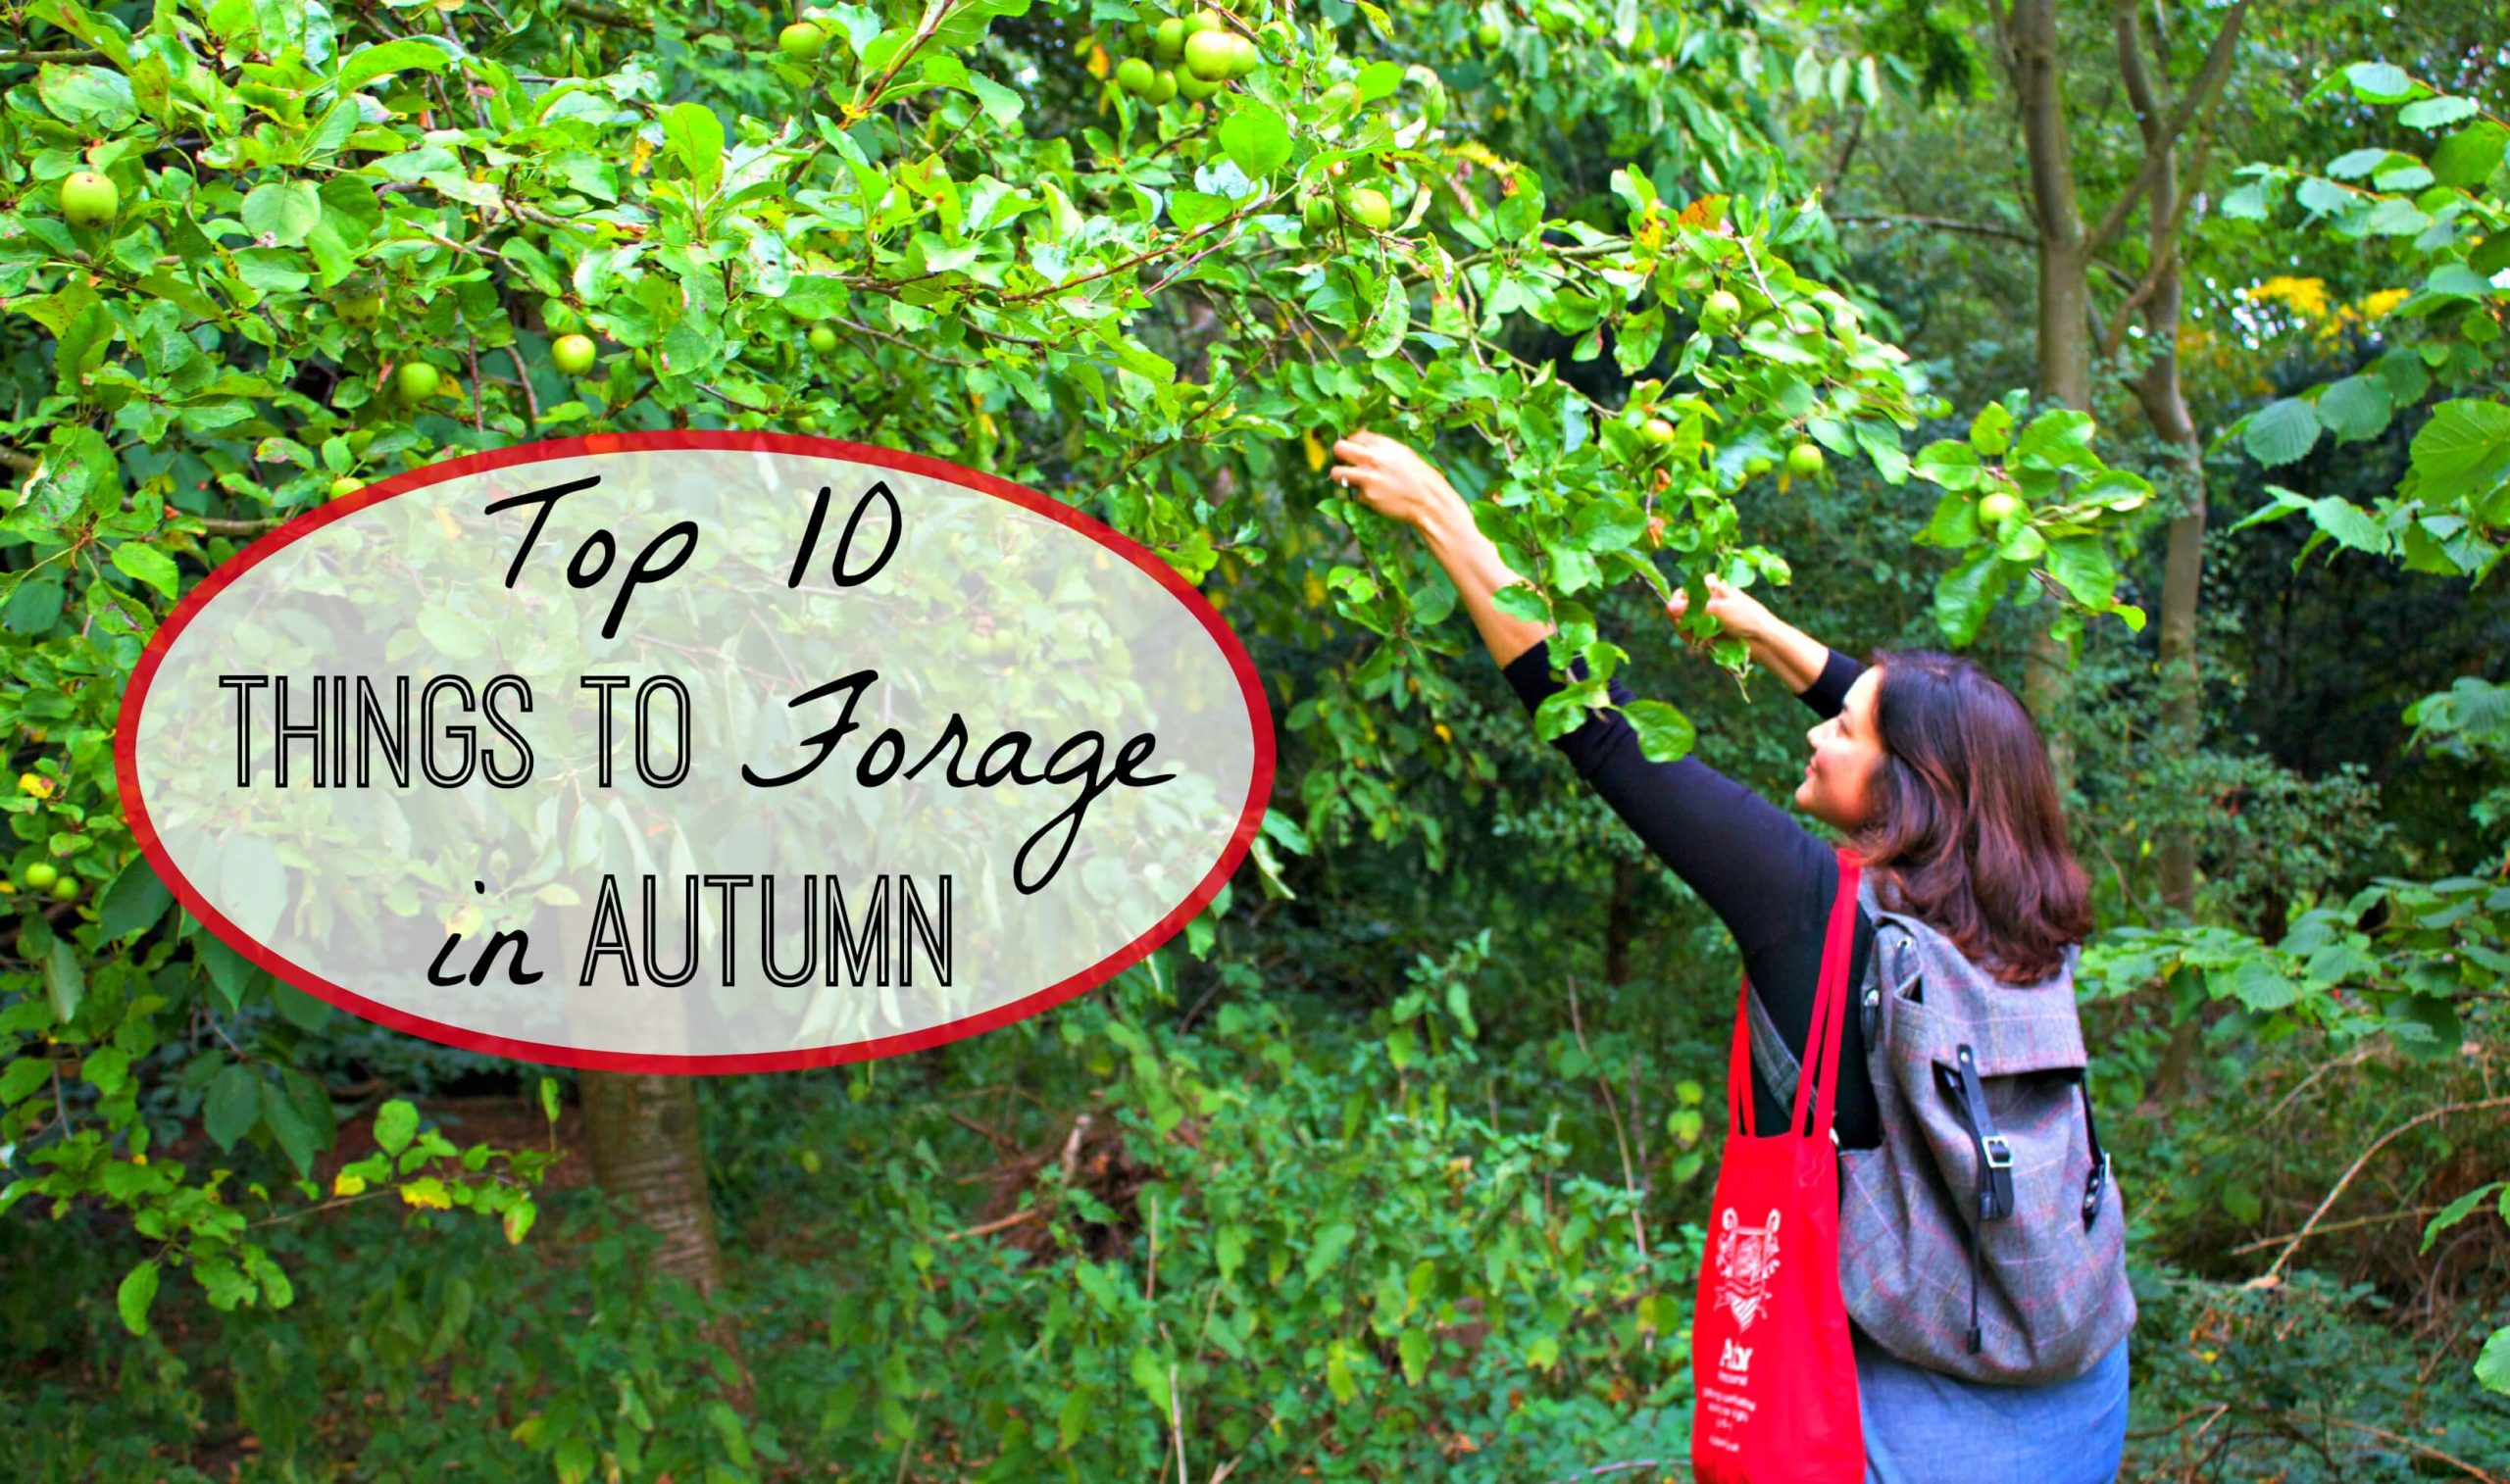 Top 10 Things to Forage in Autumn